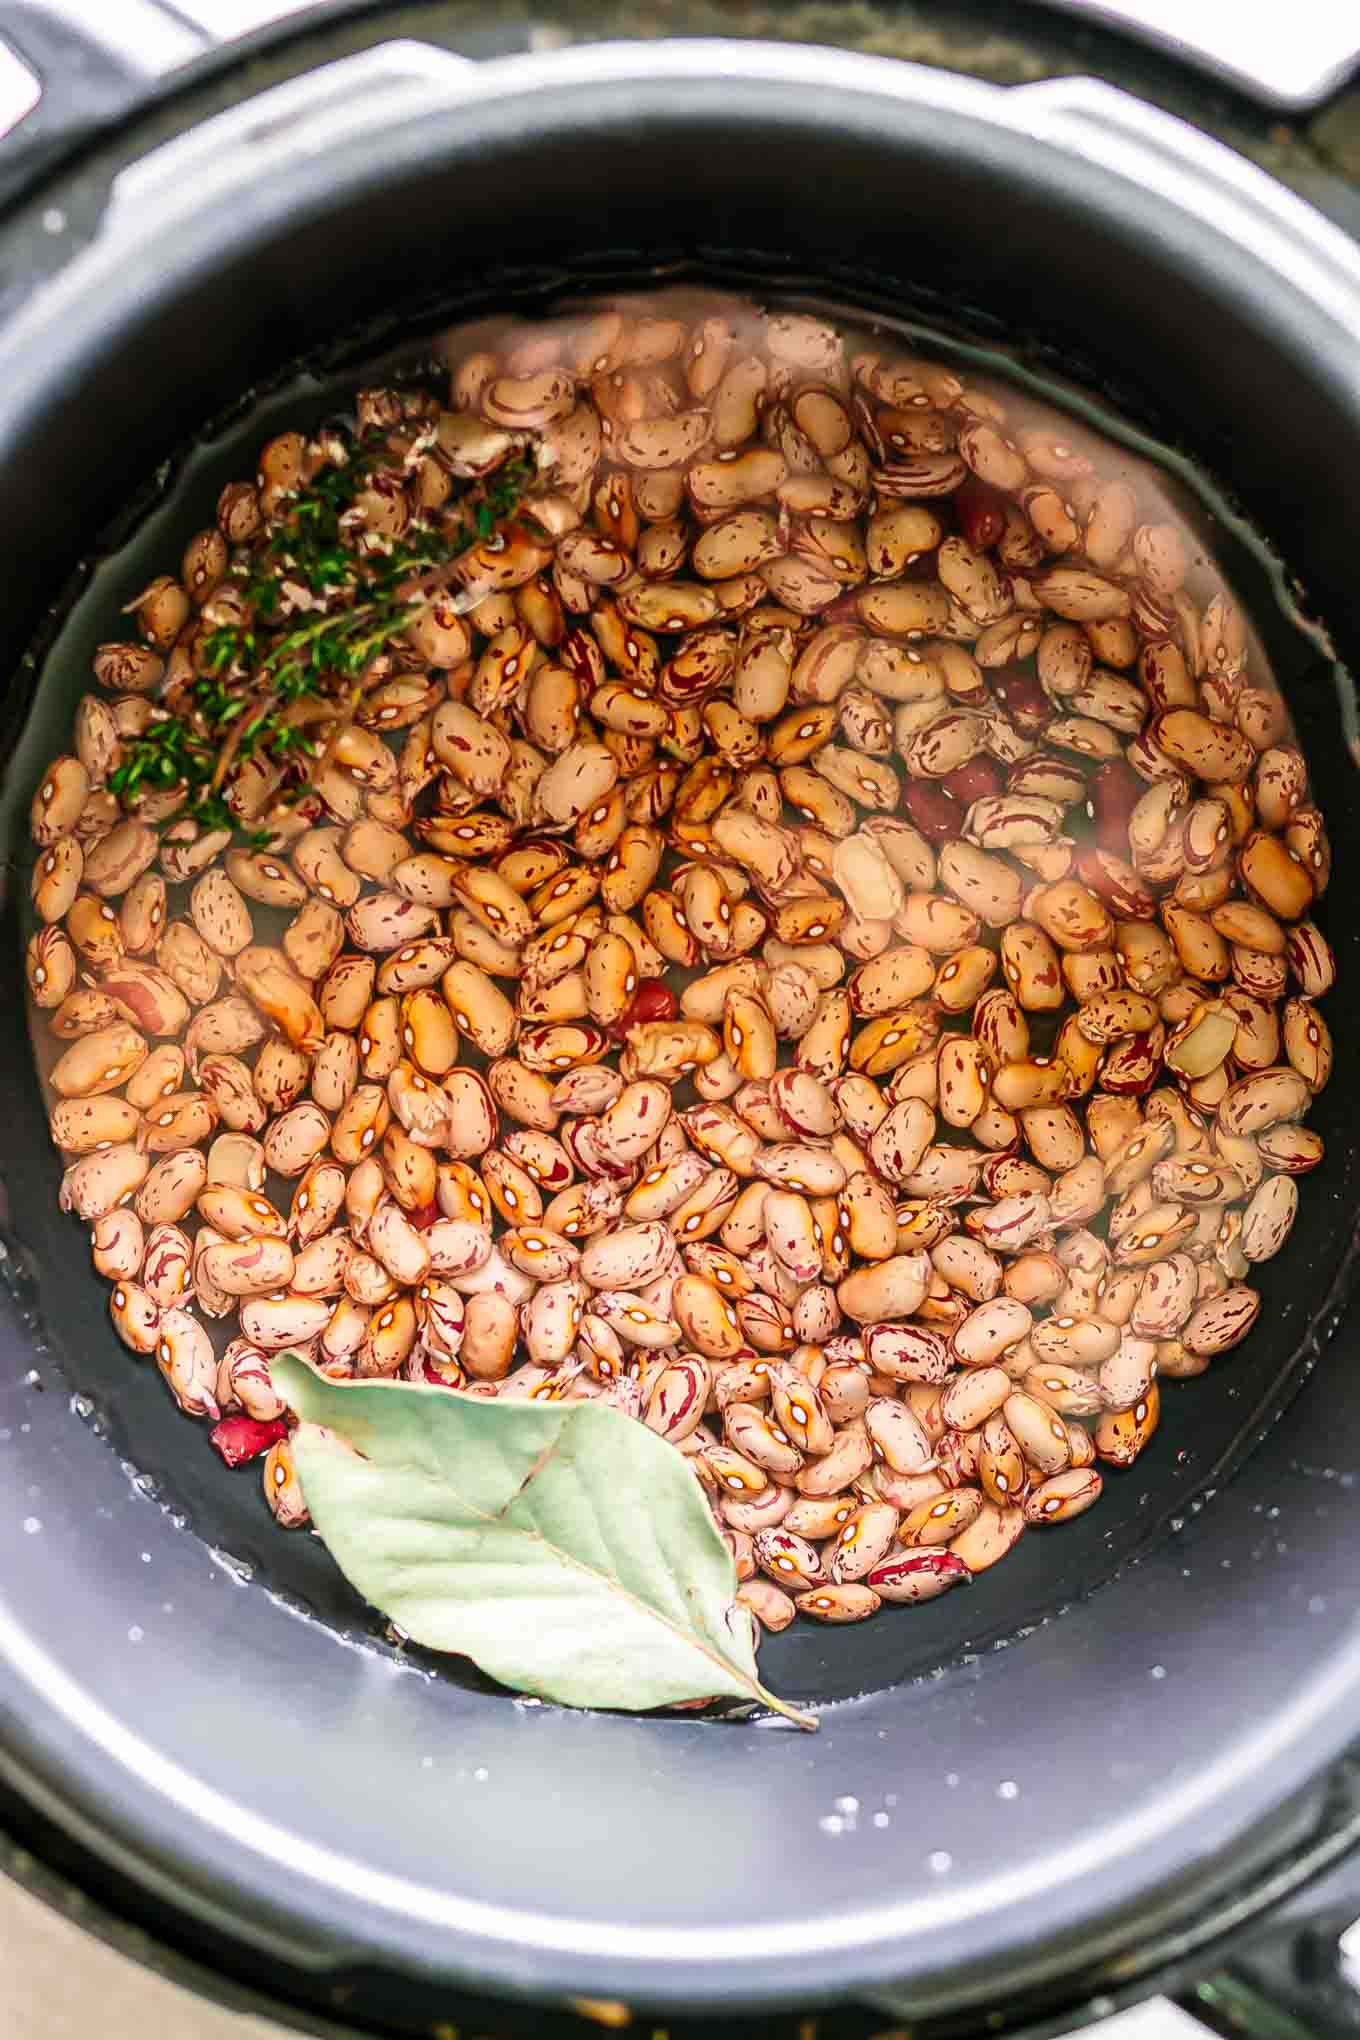 cranberry beans soaking in water inside an instant pot with fresh herbs before cooking